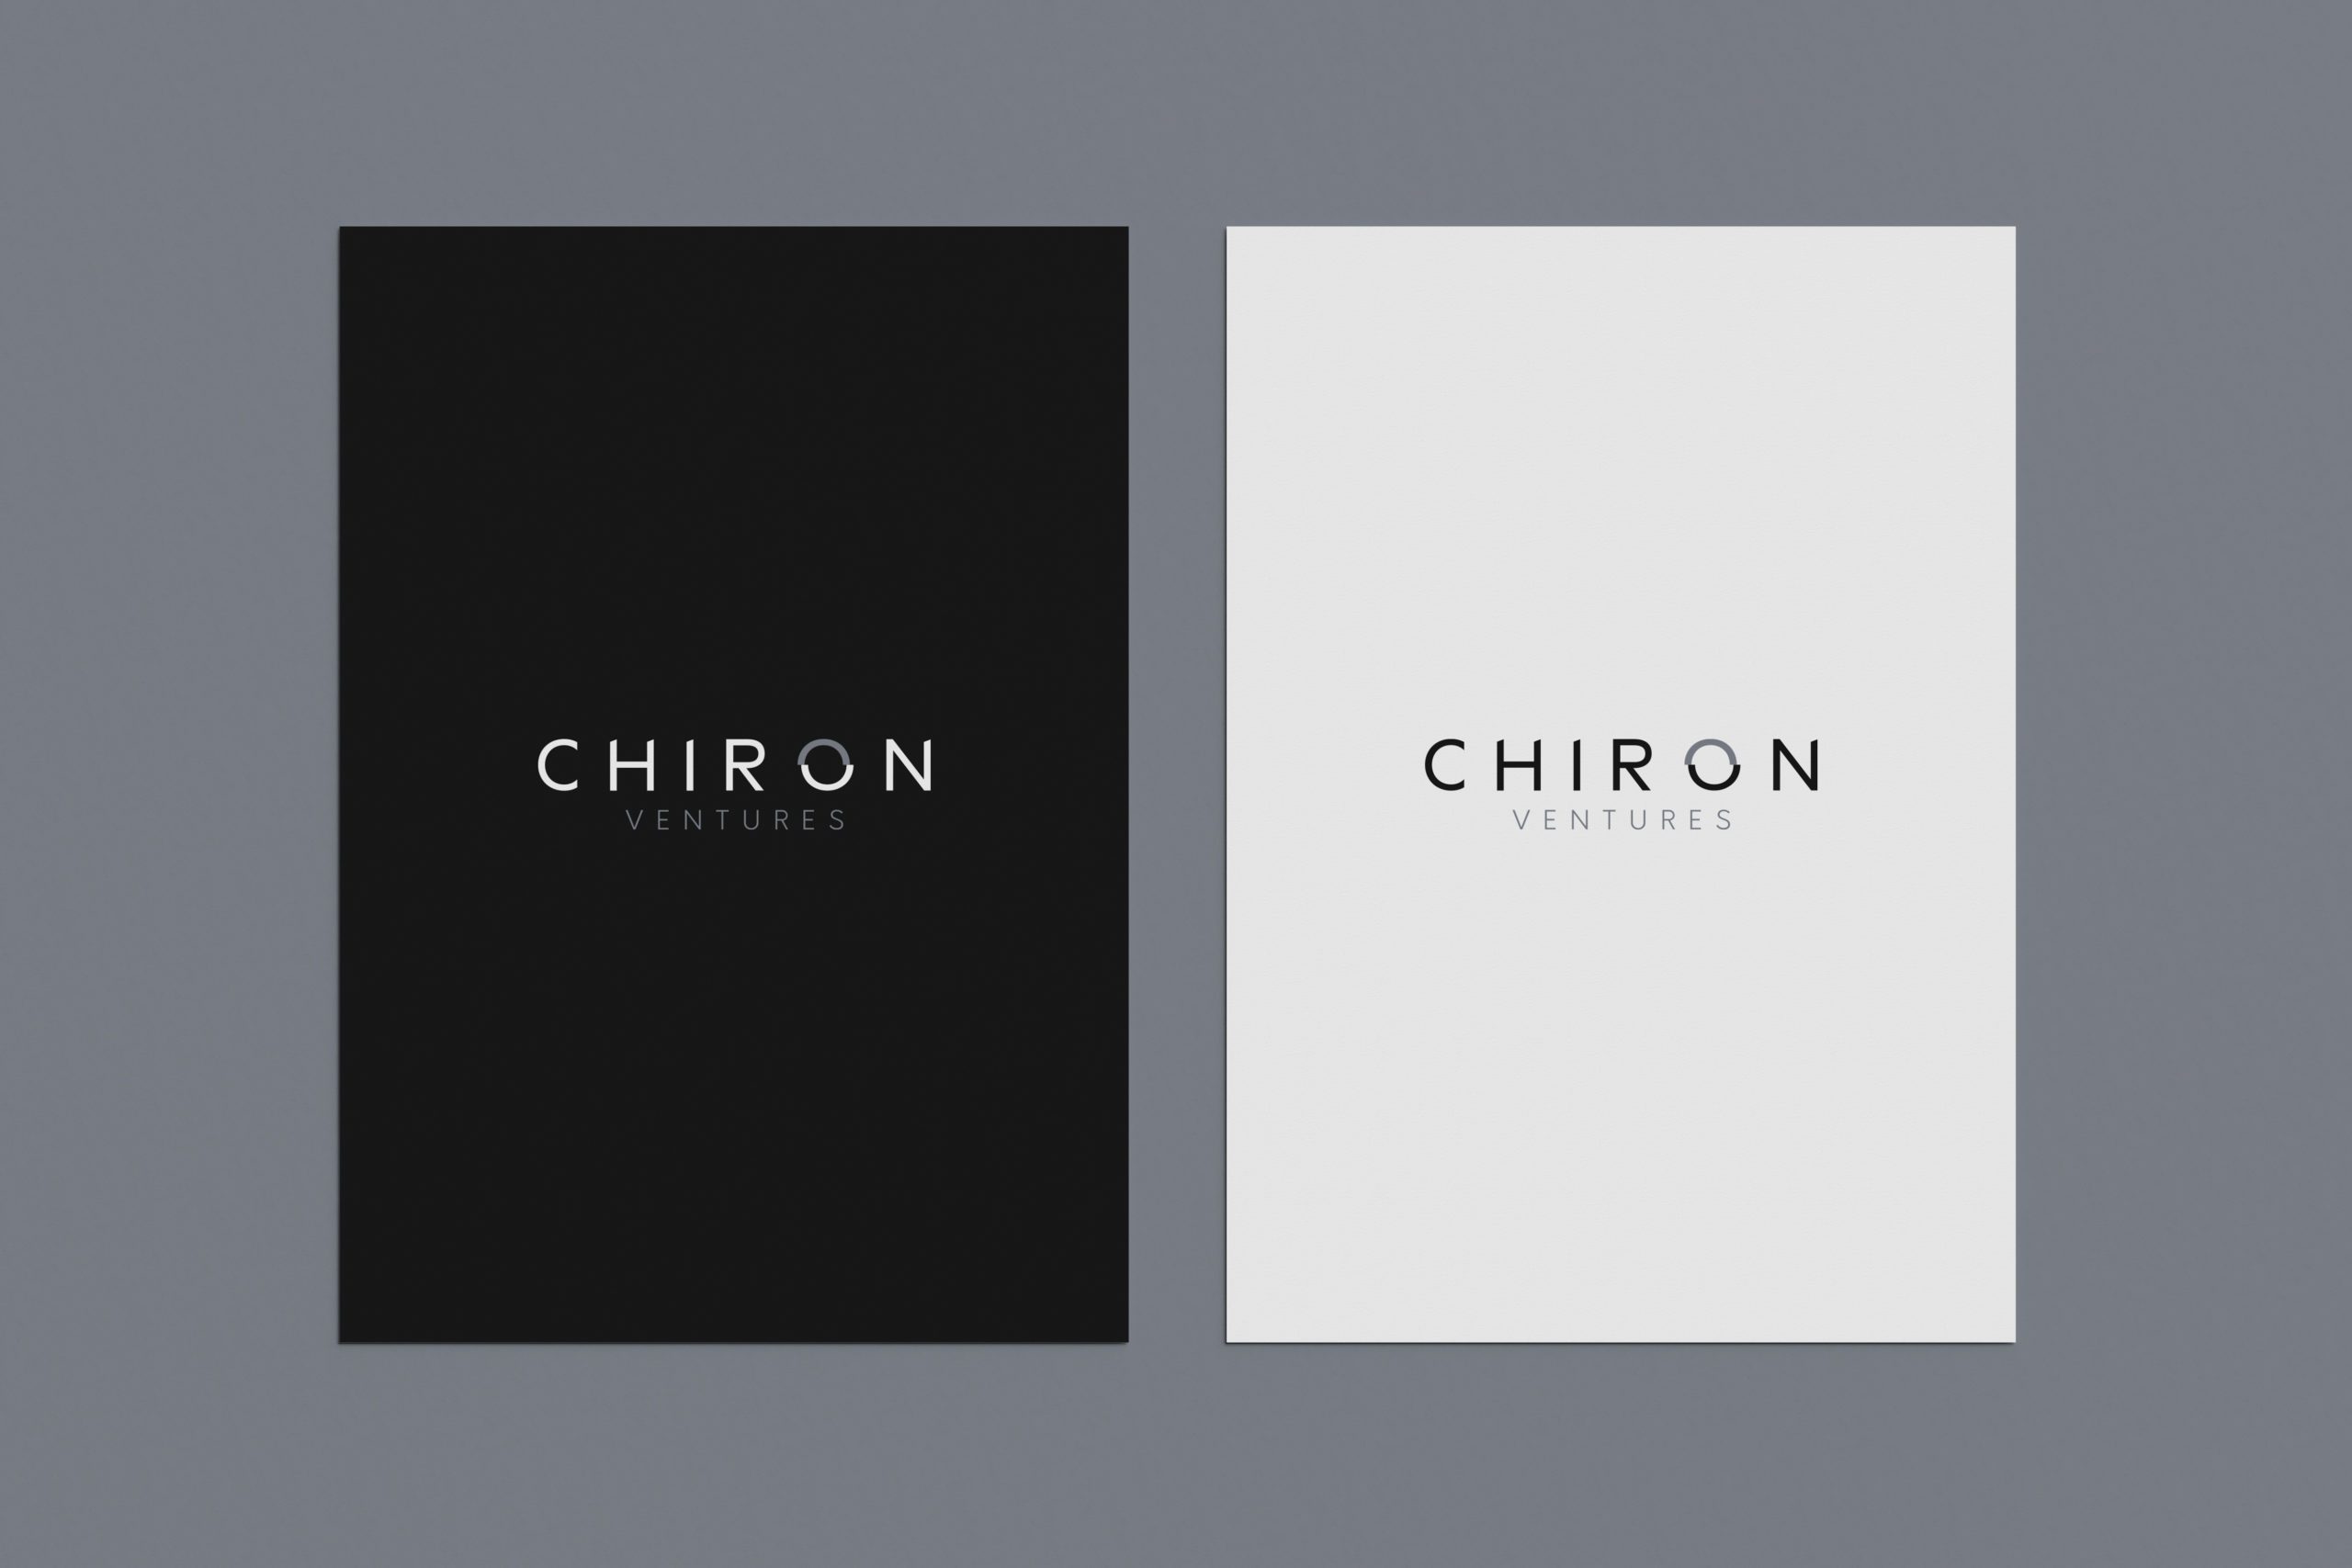 Chiron Partners logo on black and white background